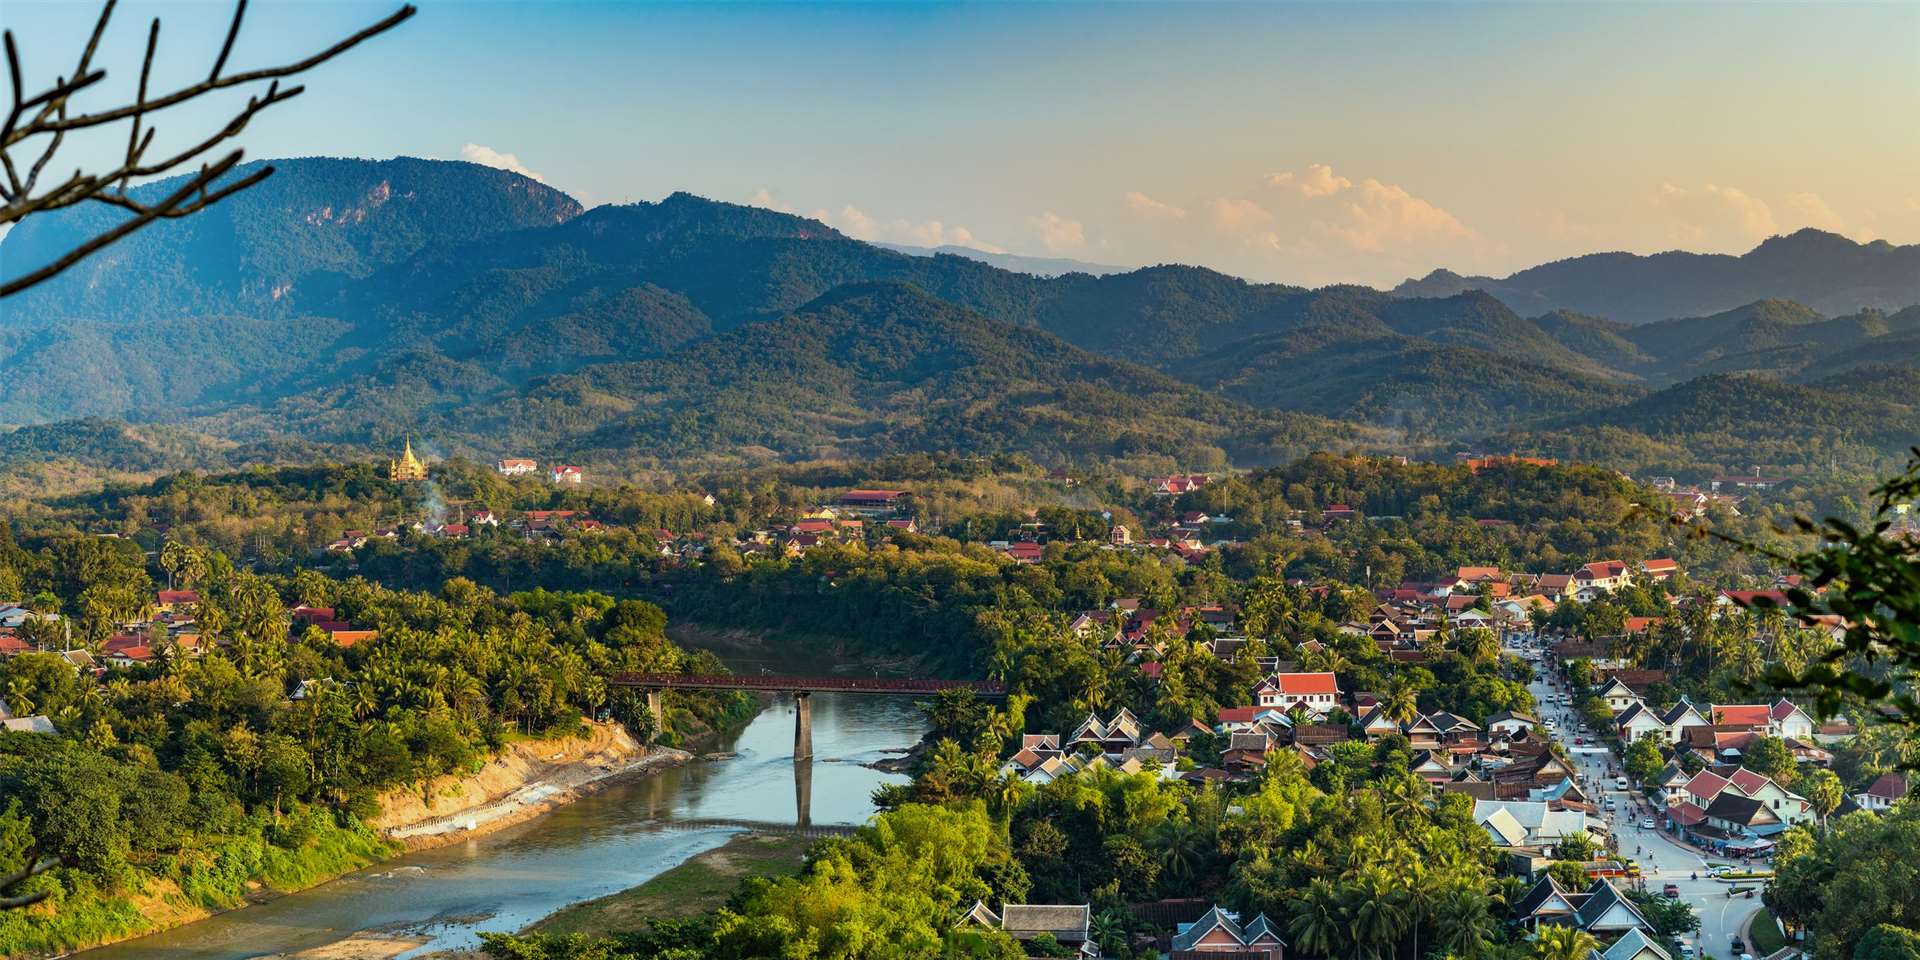 There really is something for everyone at Luang Prabang in Laos, whether you’re interested in communing with nature, learning more about local culture or walking through beautiful temples.